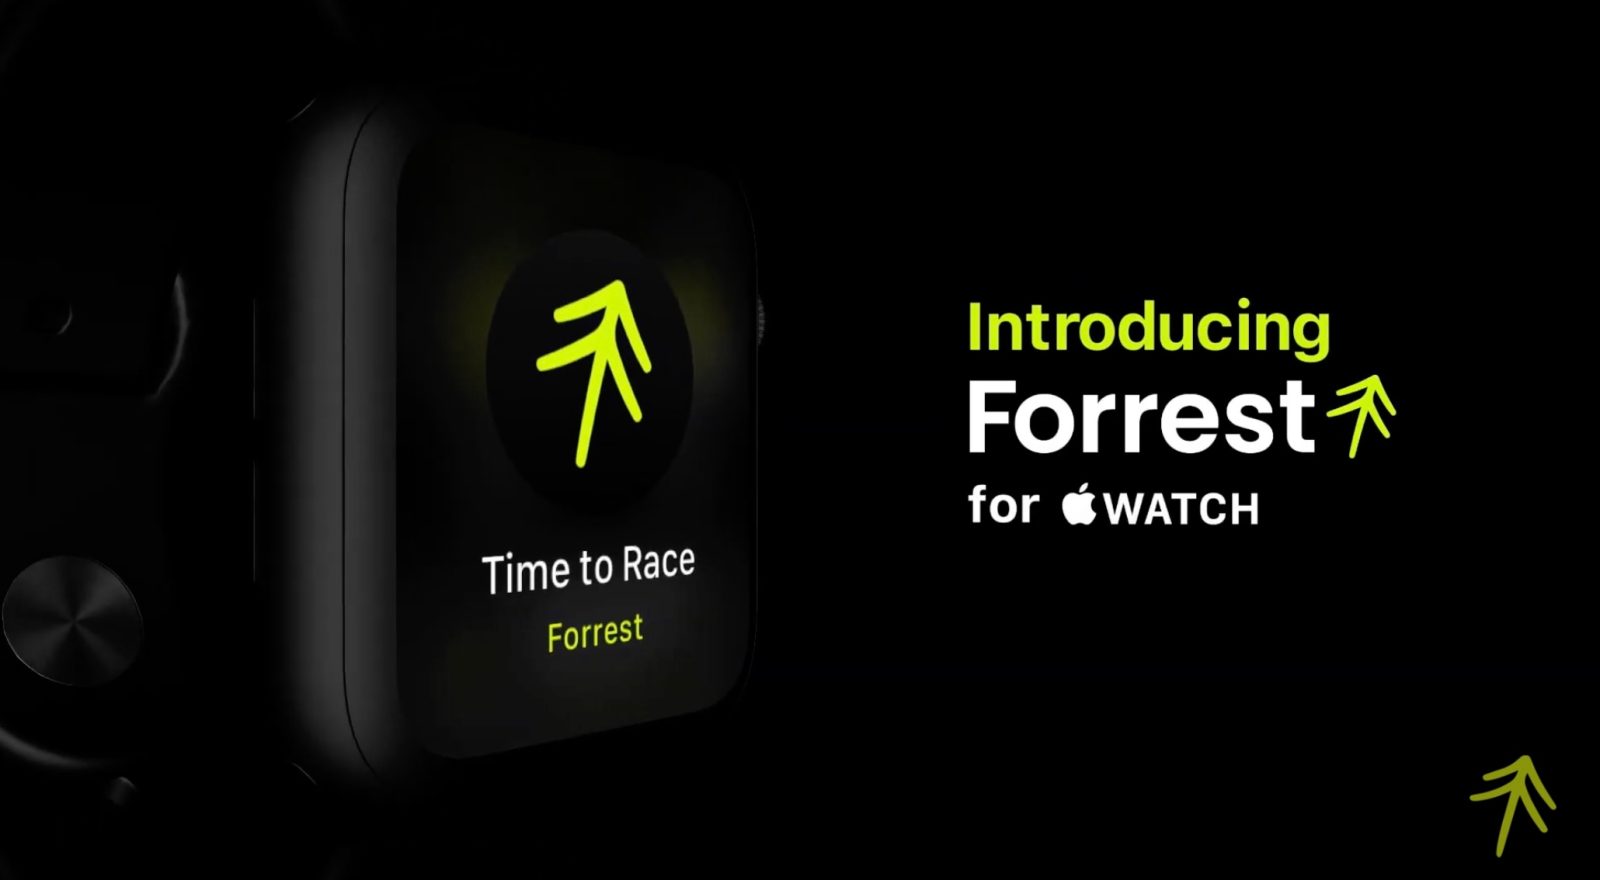 Forrest iPhone fitness race app gets Apple Watch support